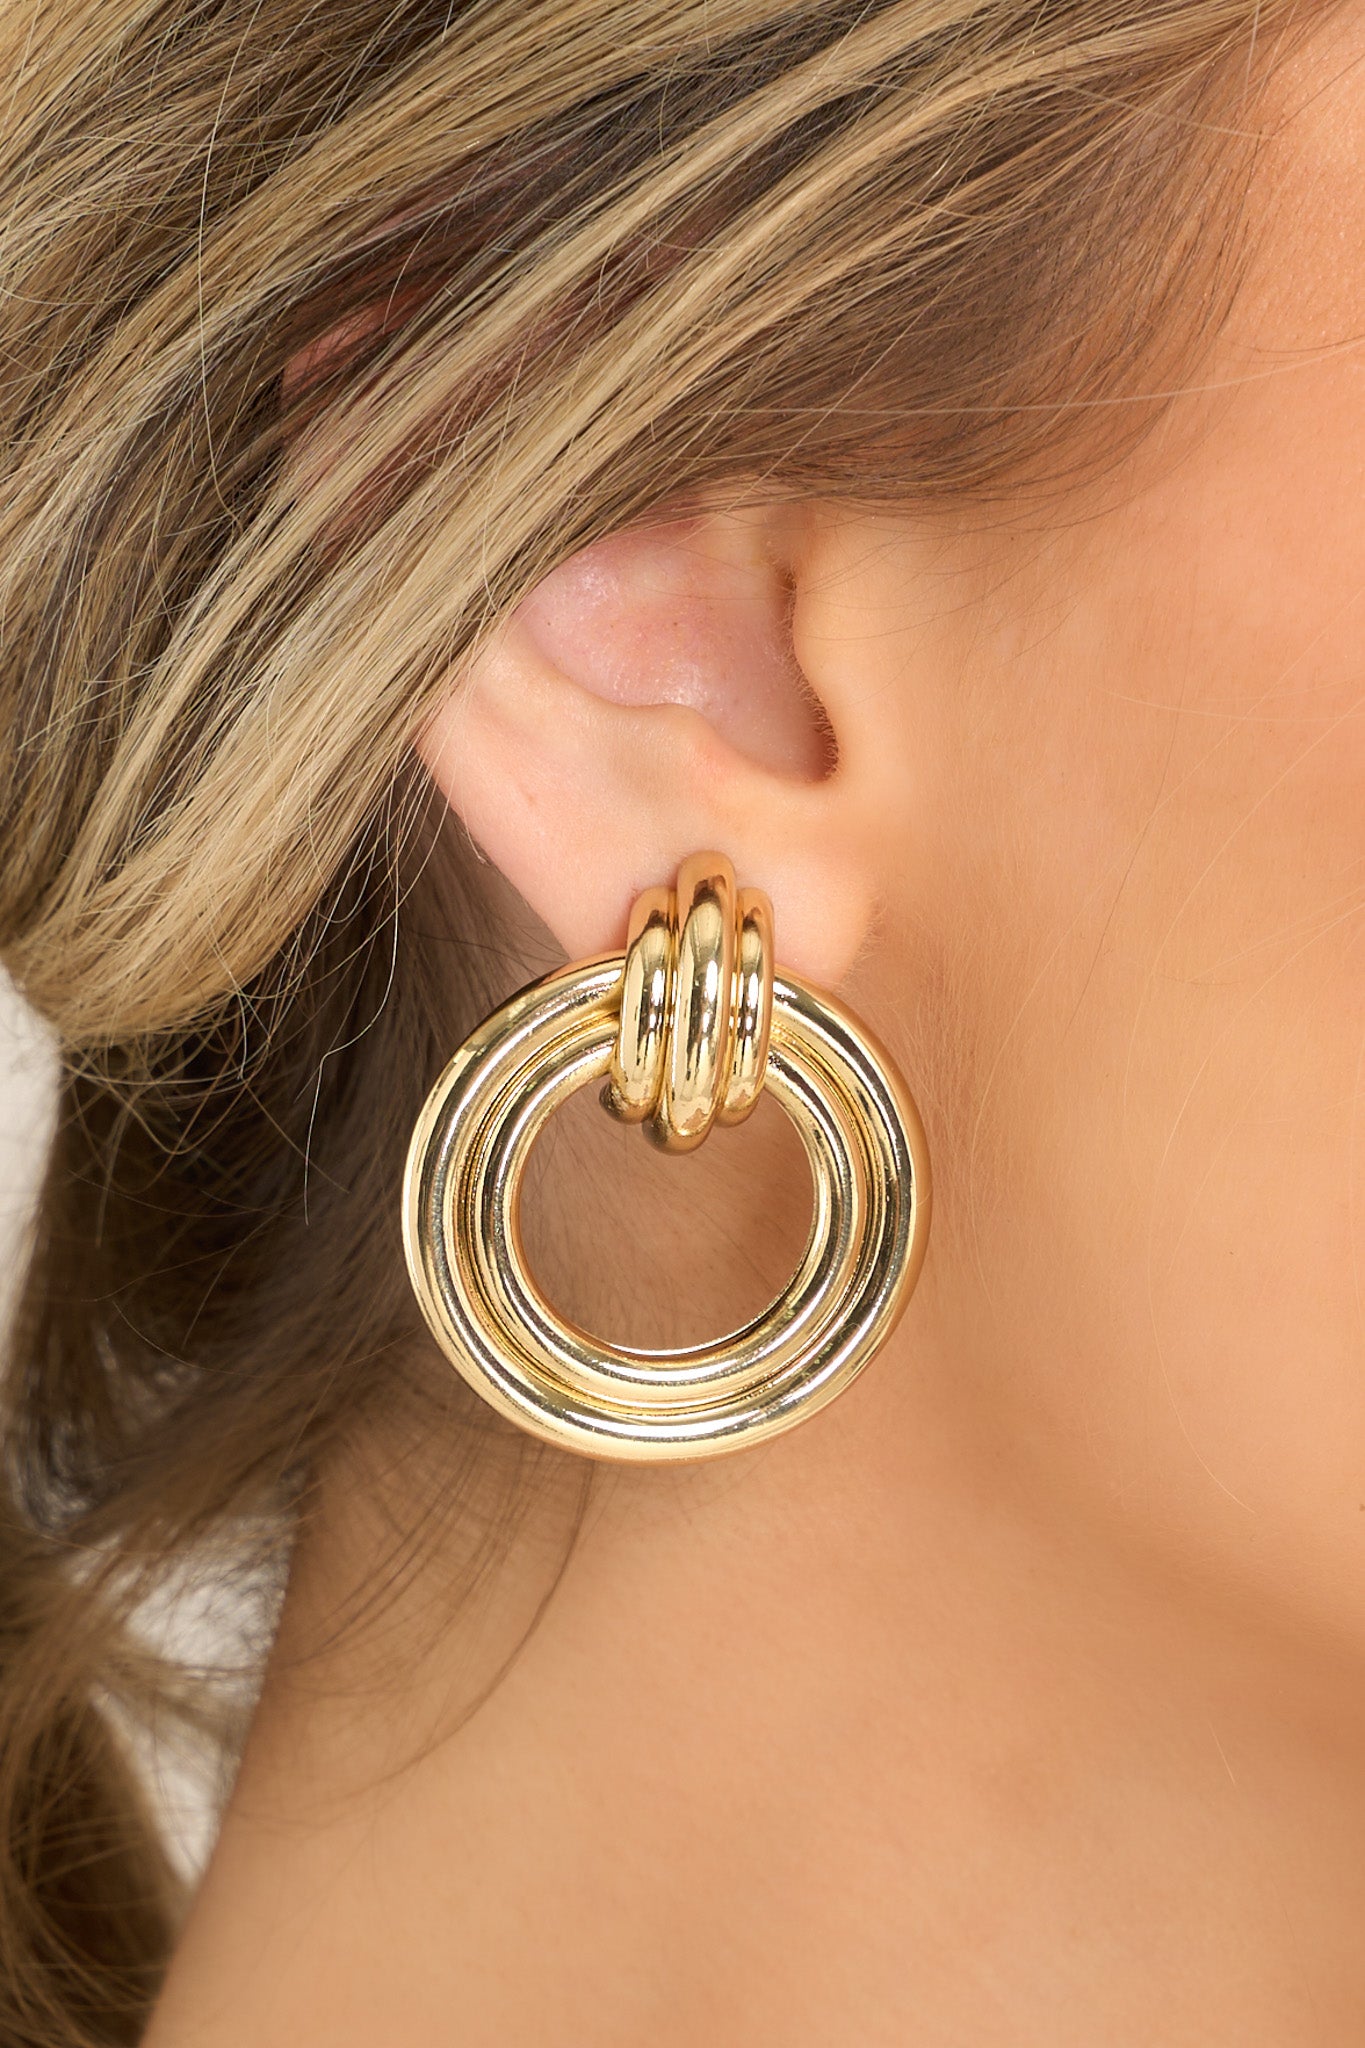 These gold earrings feature gold hardware, a stud with a connected hoop, and secure post backings. 